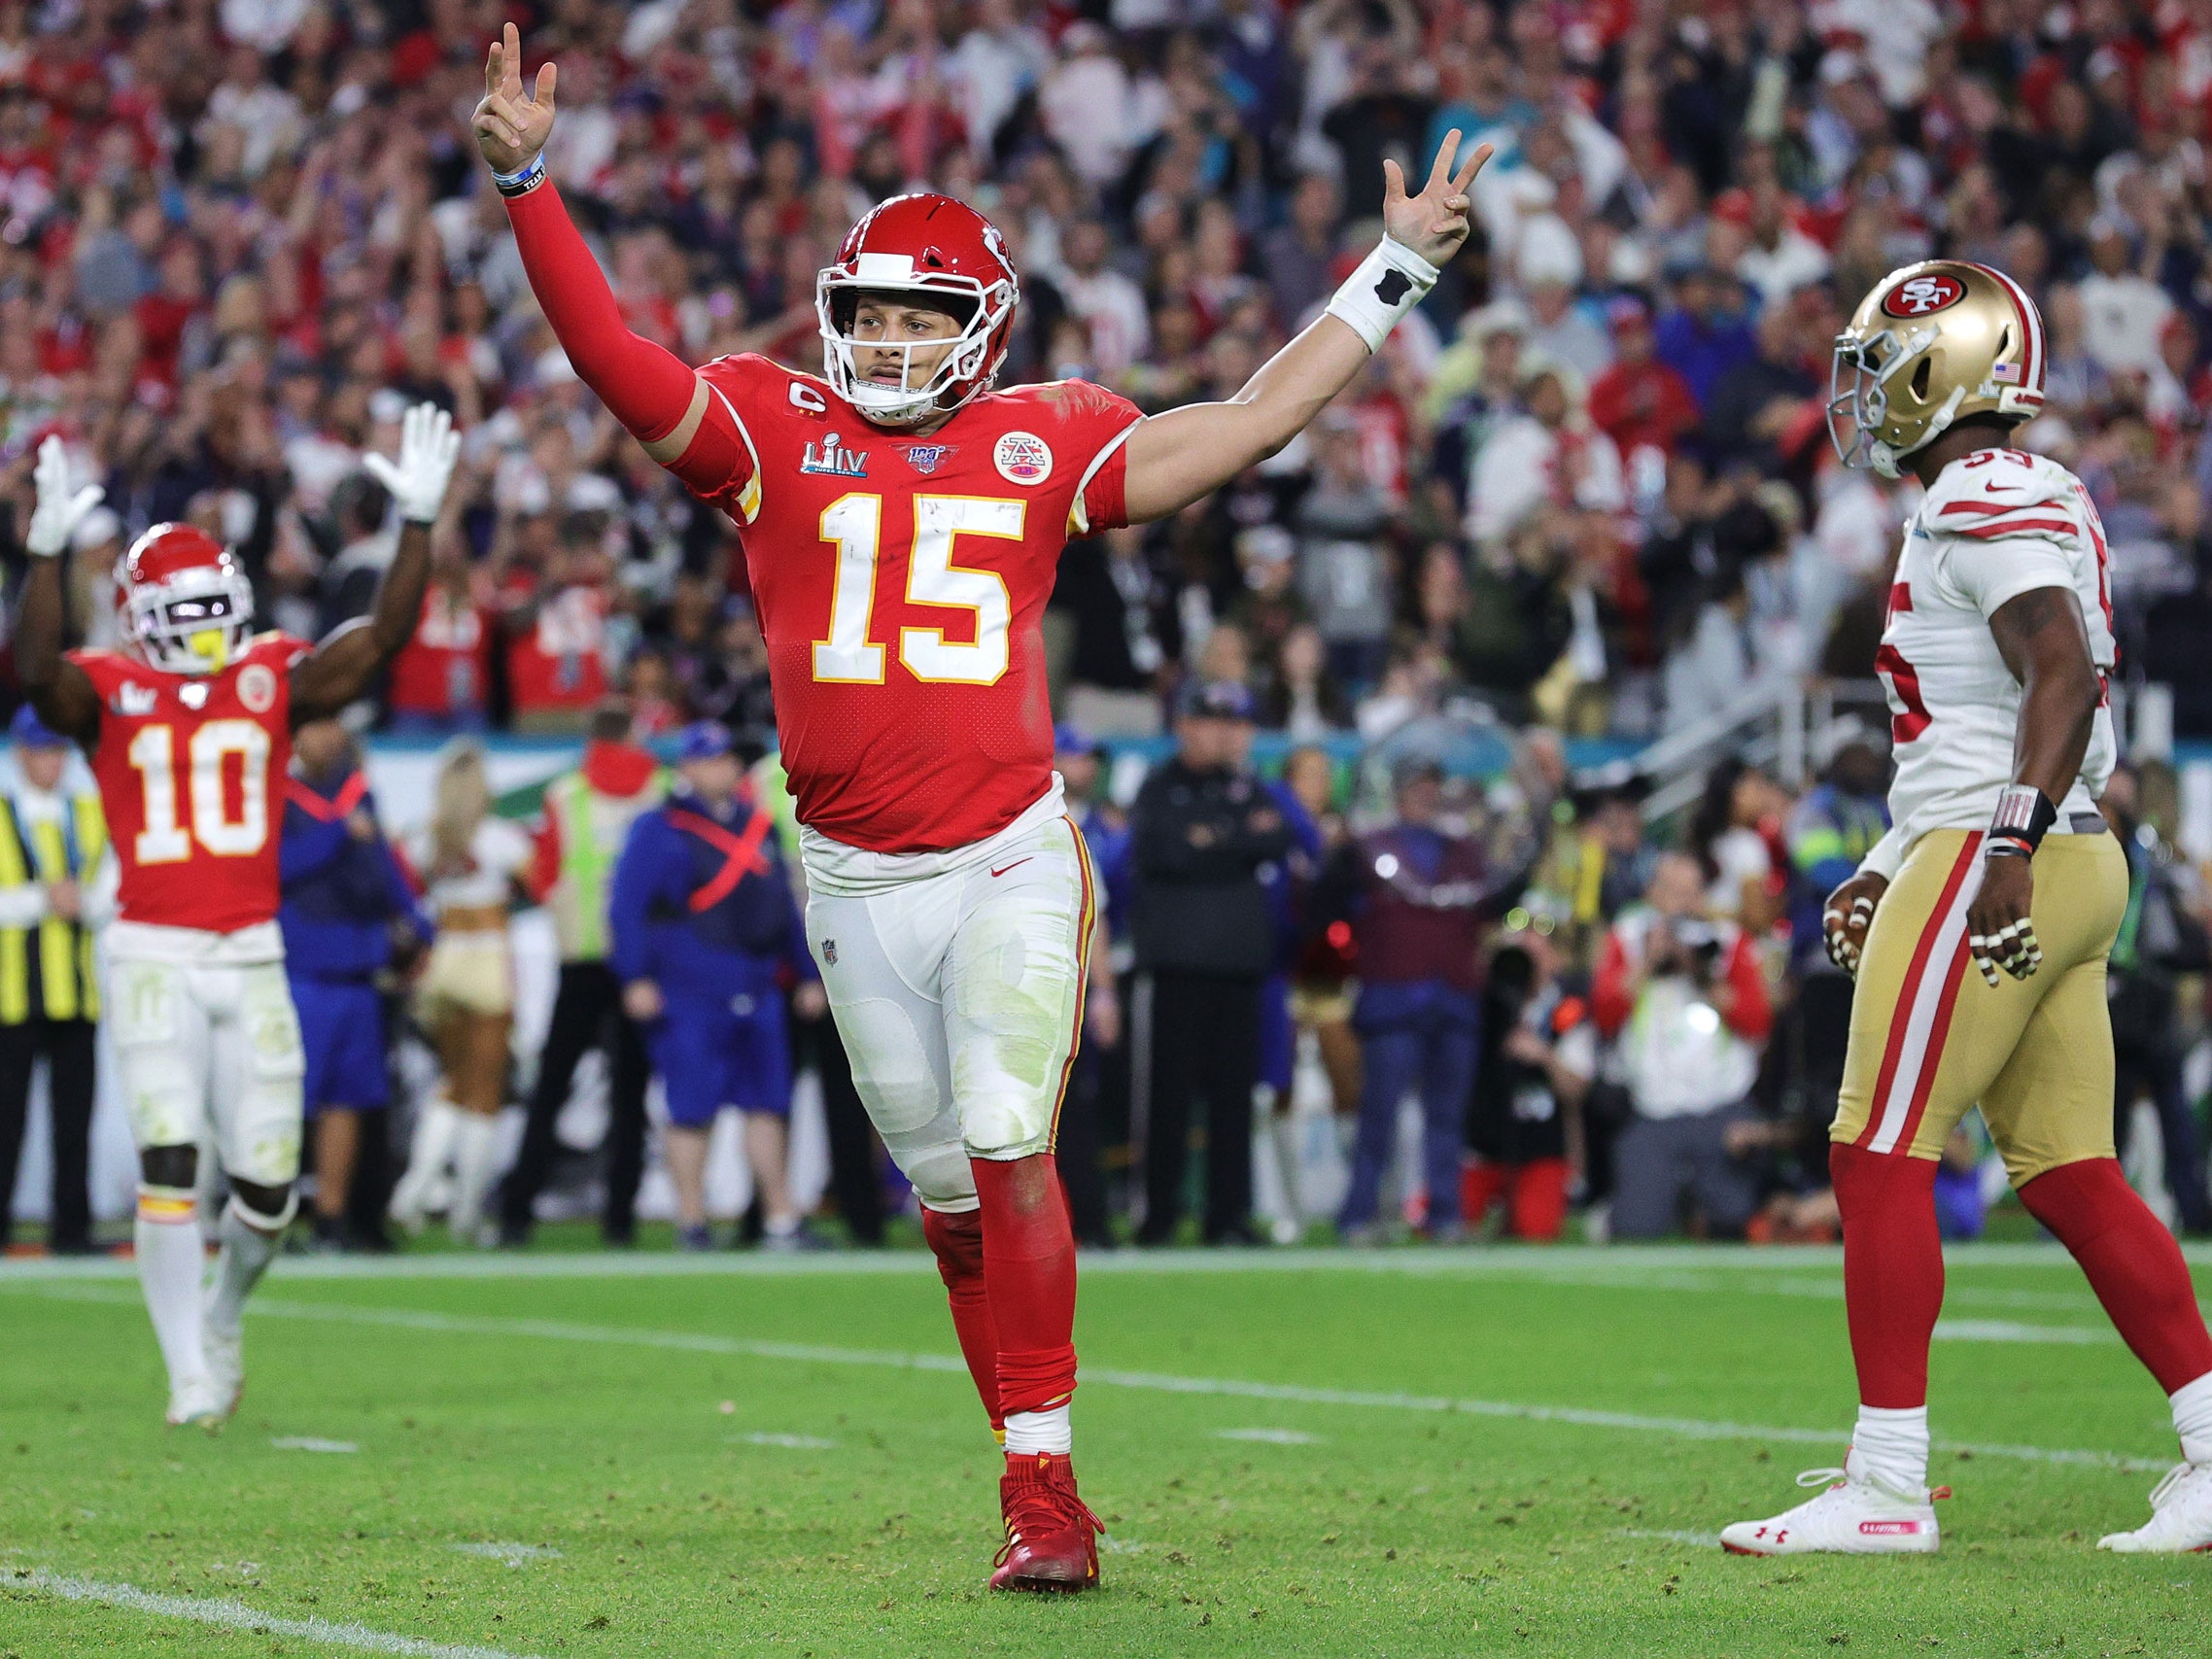 In Super Bowl LIV, Patrick Mahomes and the Chiefs Won More Than the 49ers Lost. The New Yorker